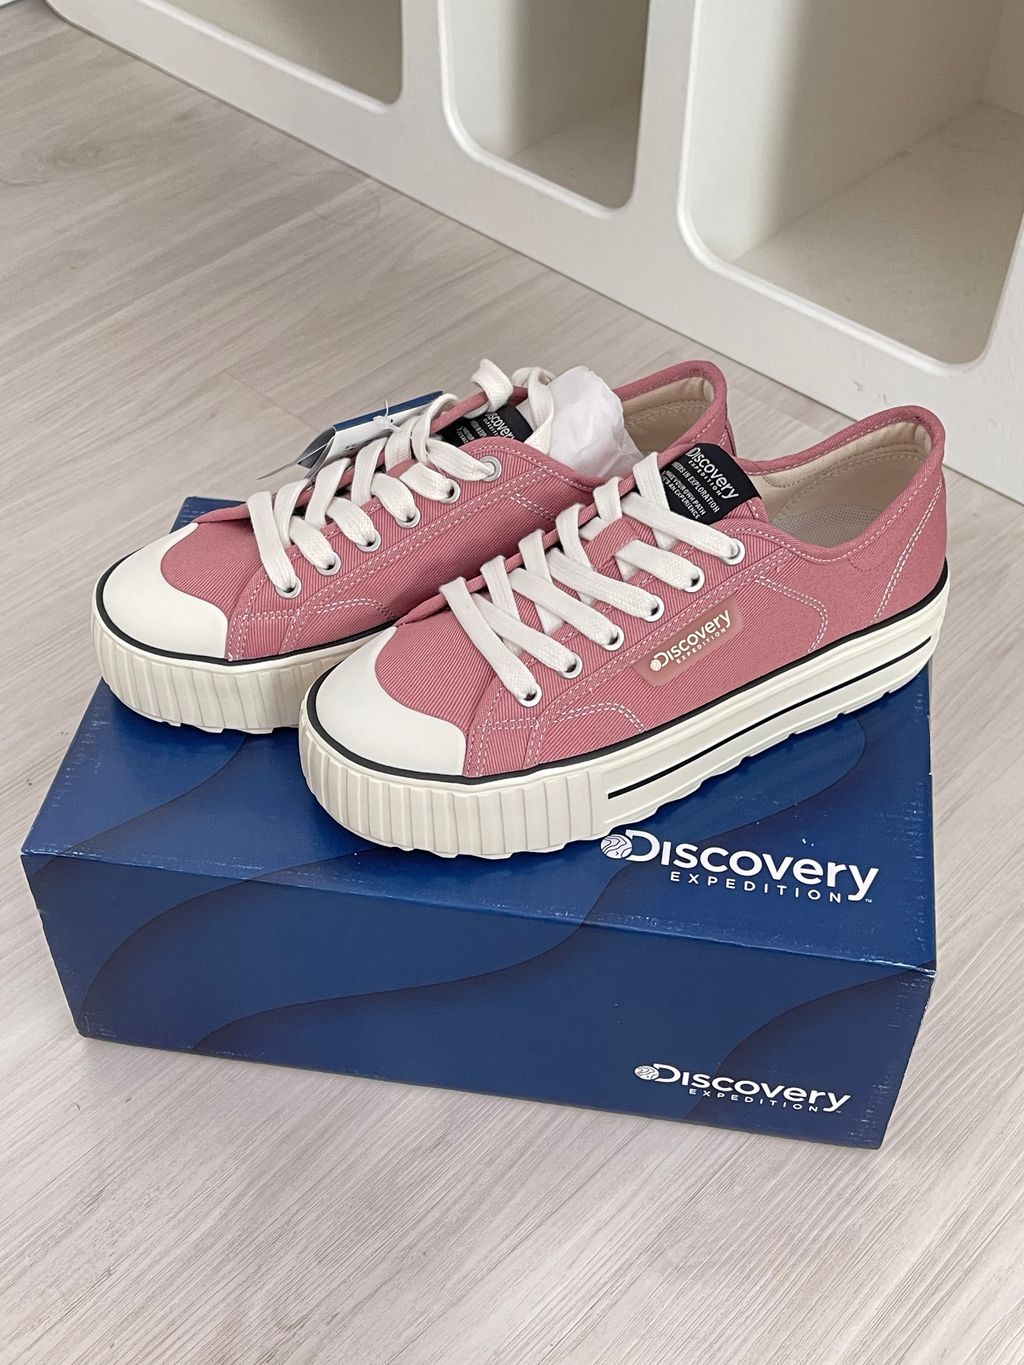 Ready Stock Discovery 02